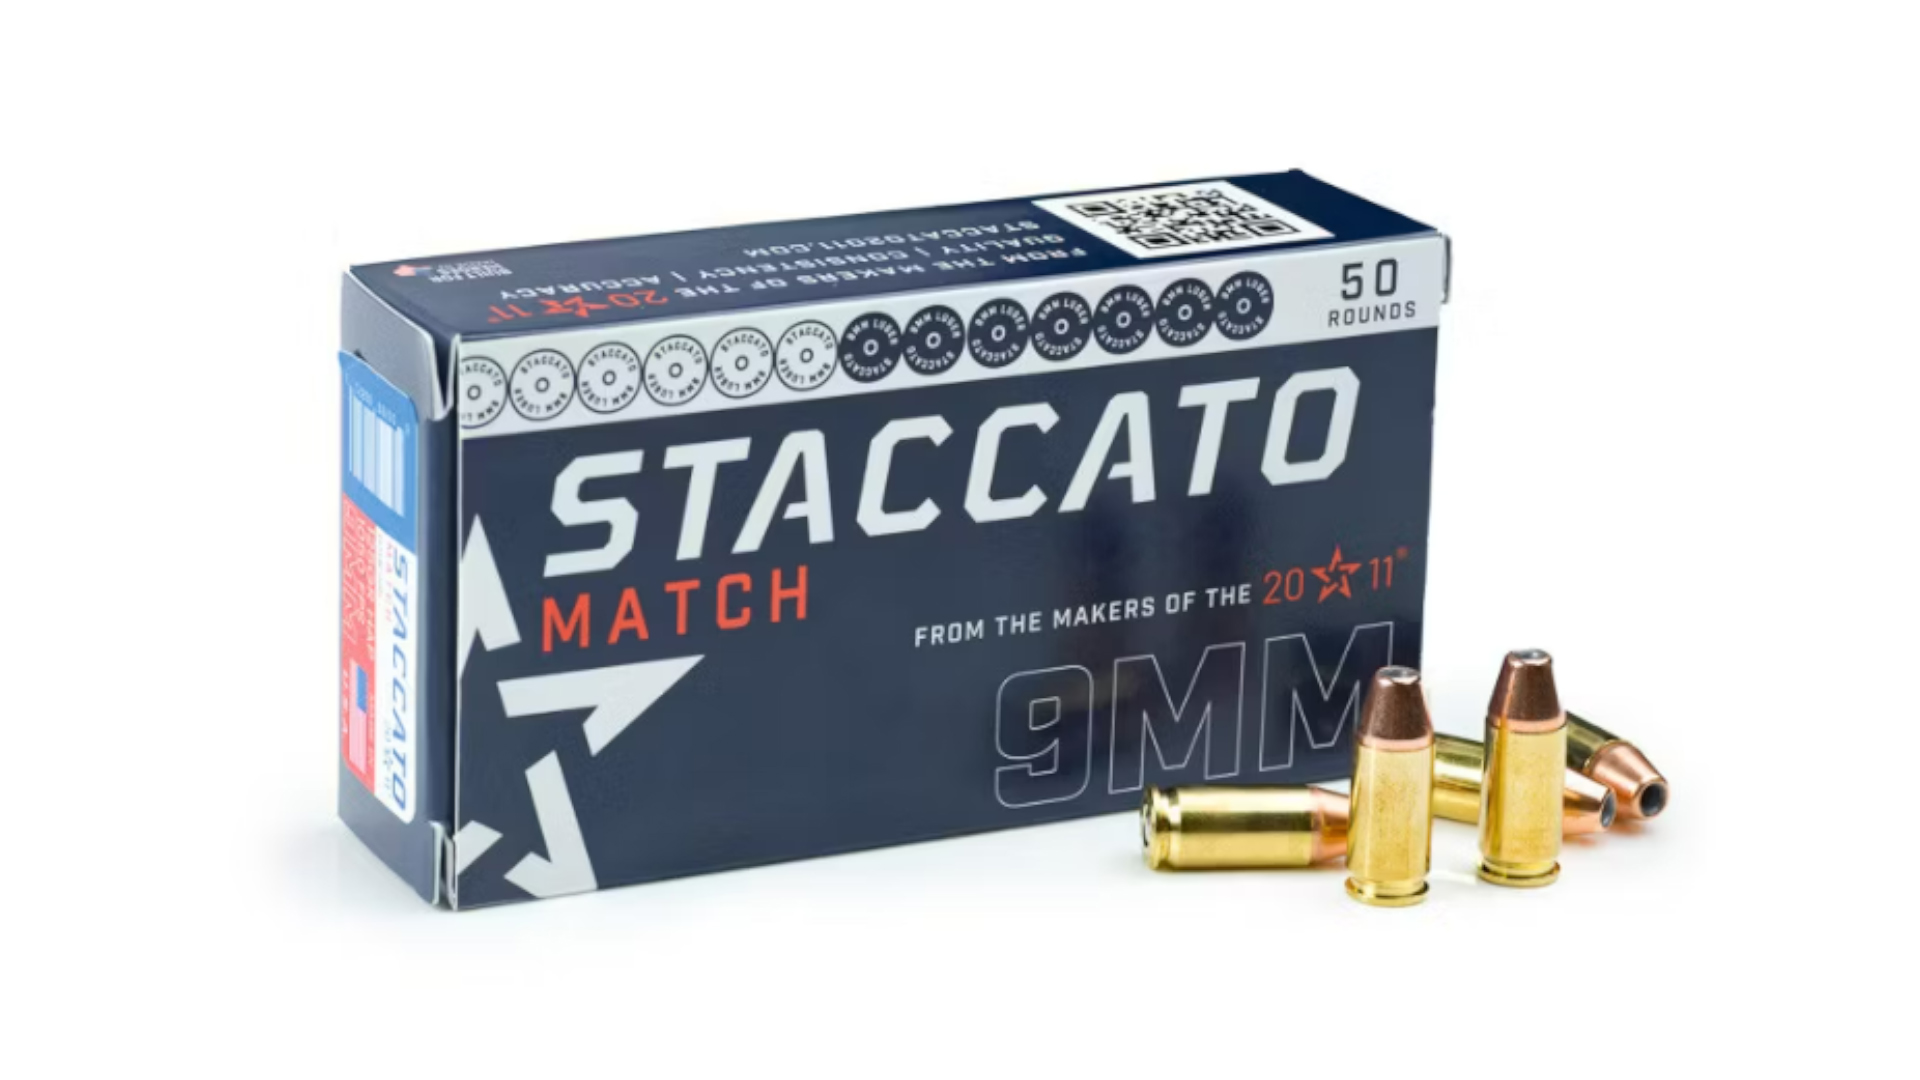 Staccato Match 9 mm ammo